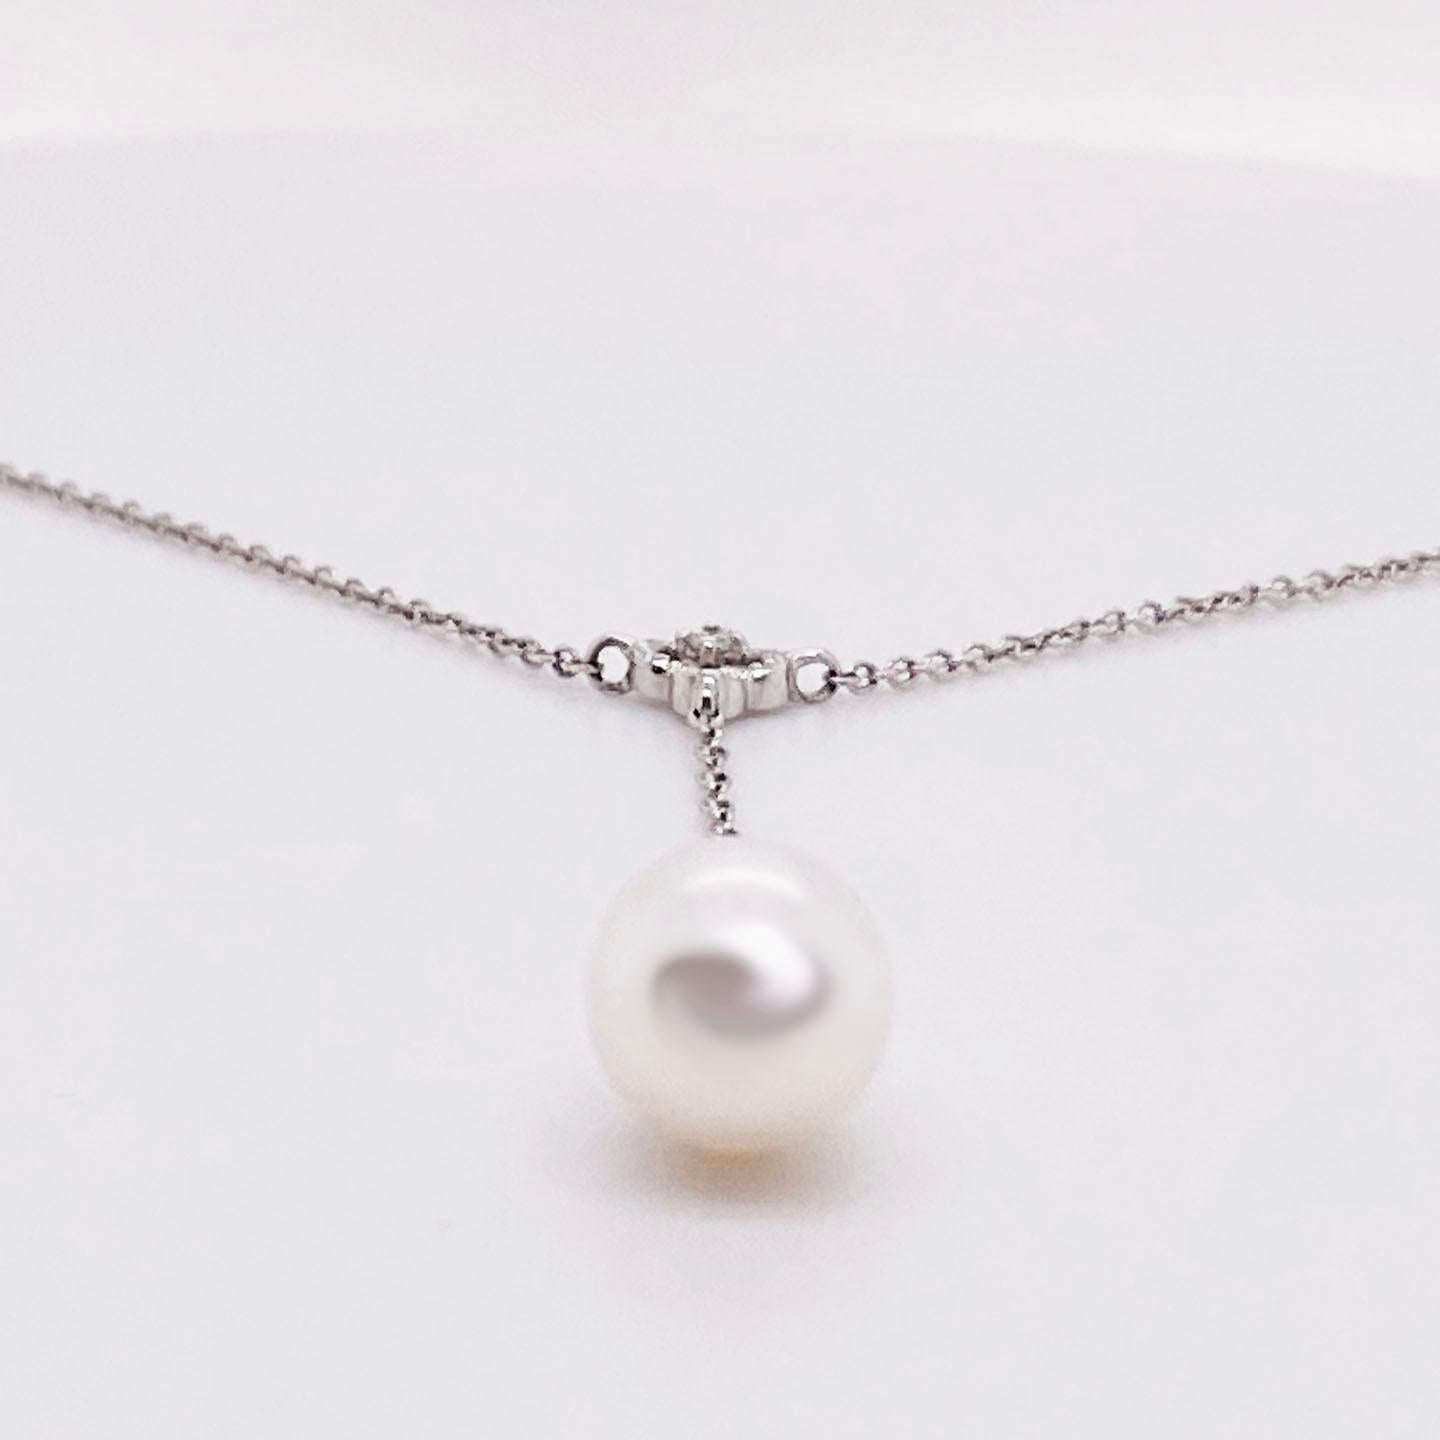 diamond necklace with pearl drops